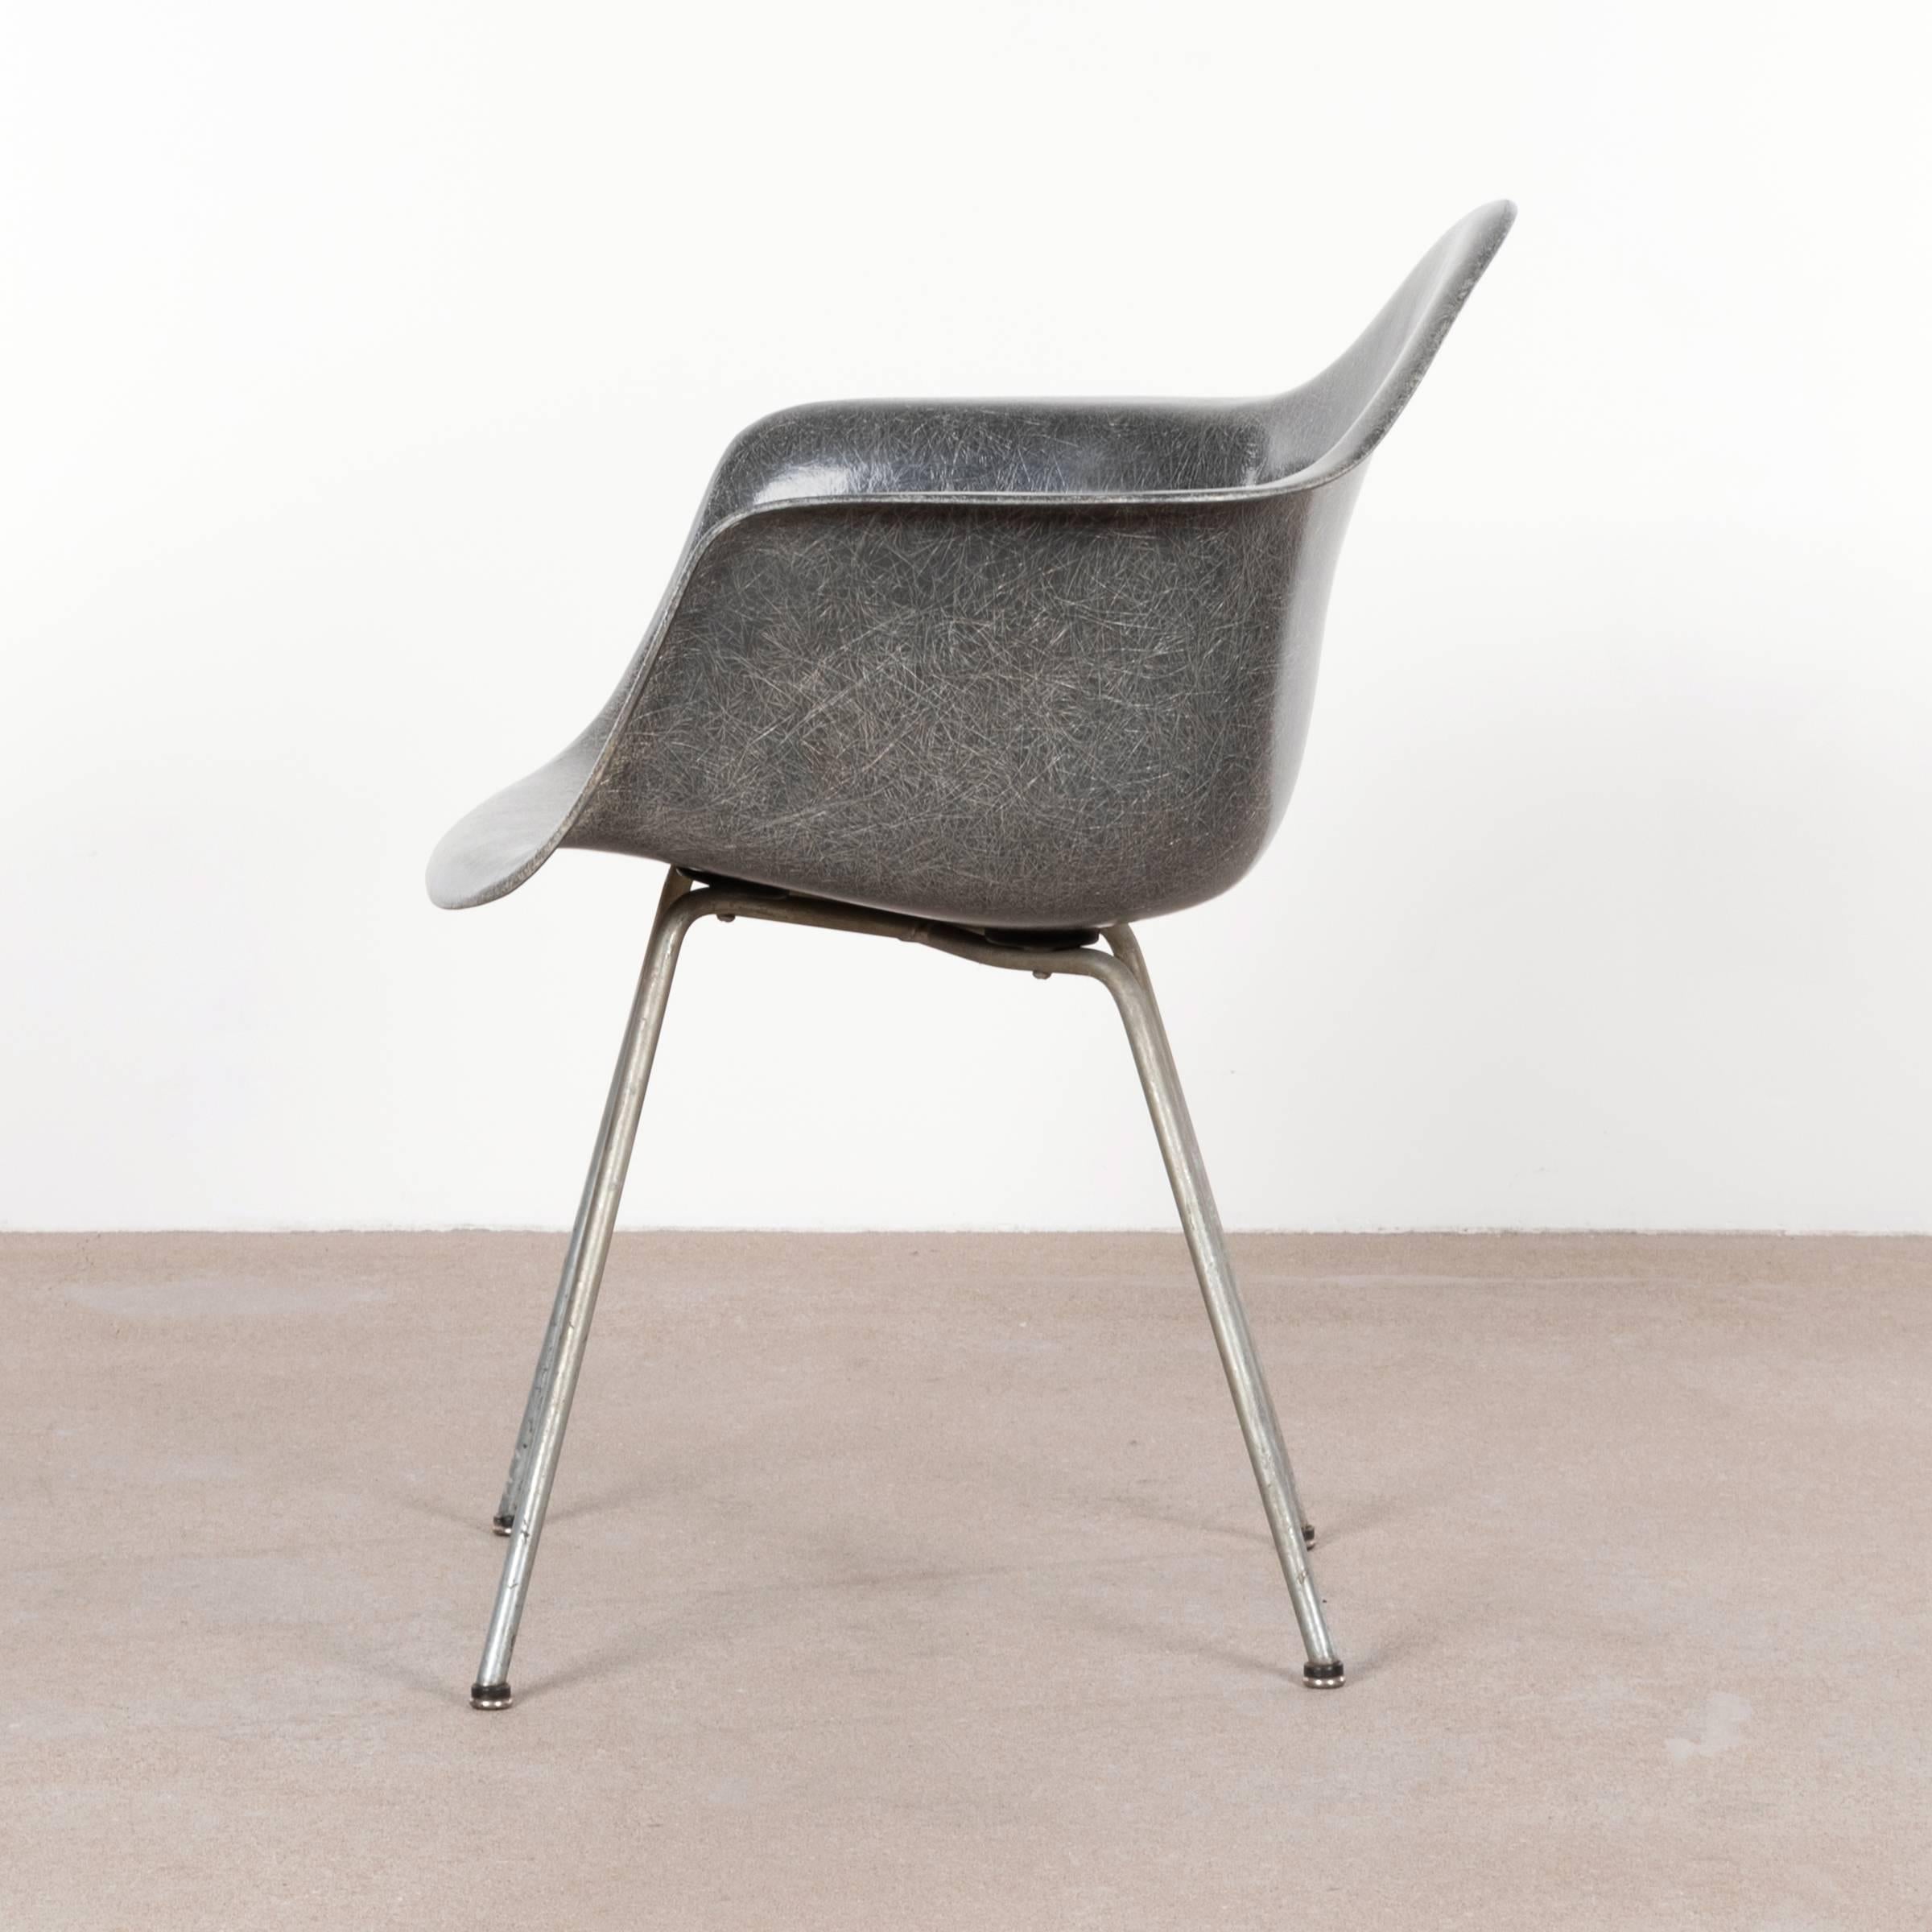 Iconic DAX chair (Dining Armchair X-base) with elephant hide grey color. The chair is in excellent original condition with only slight traces of use and perfect fiberglass patina. First generation Zenith plastics production with rope. Signed with